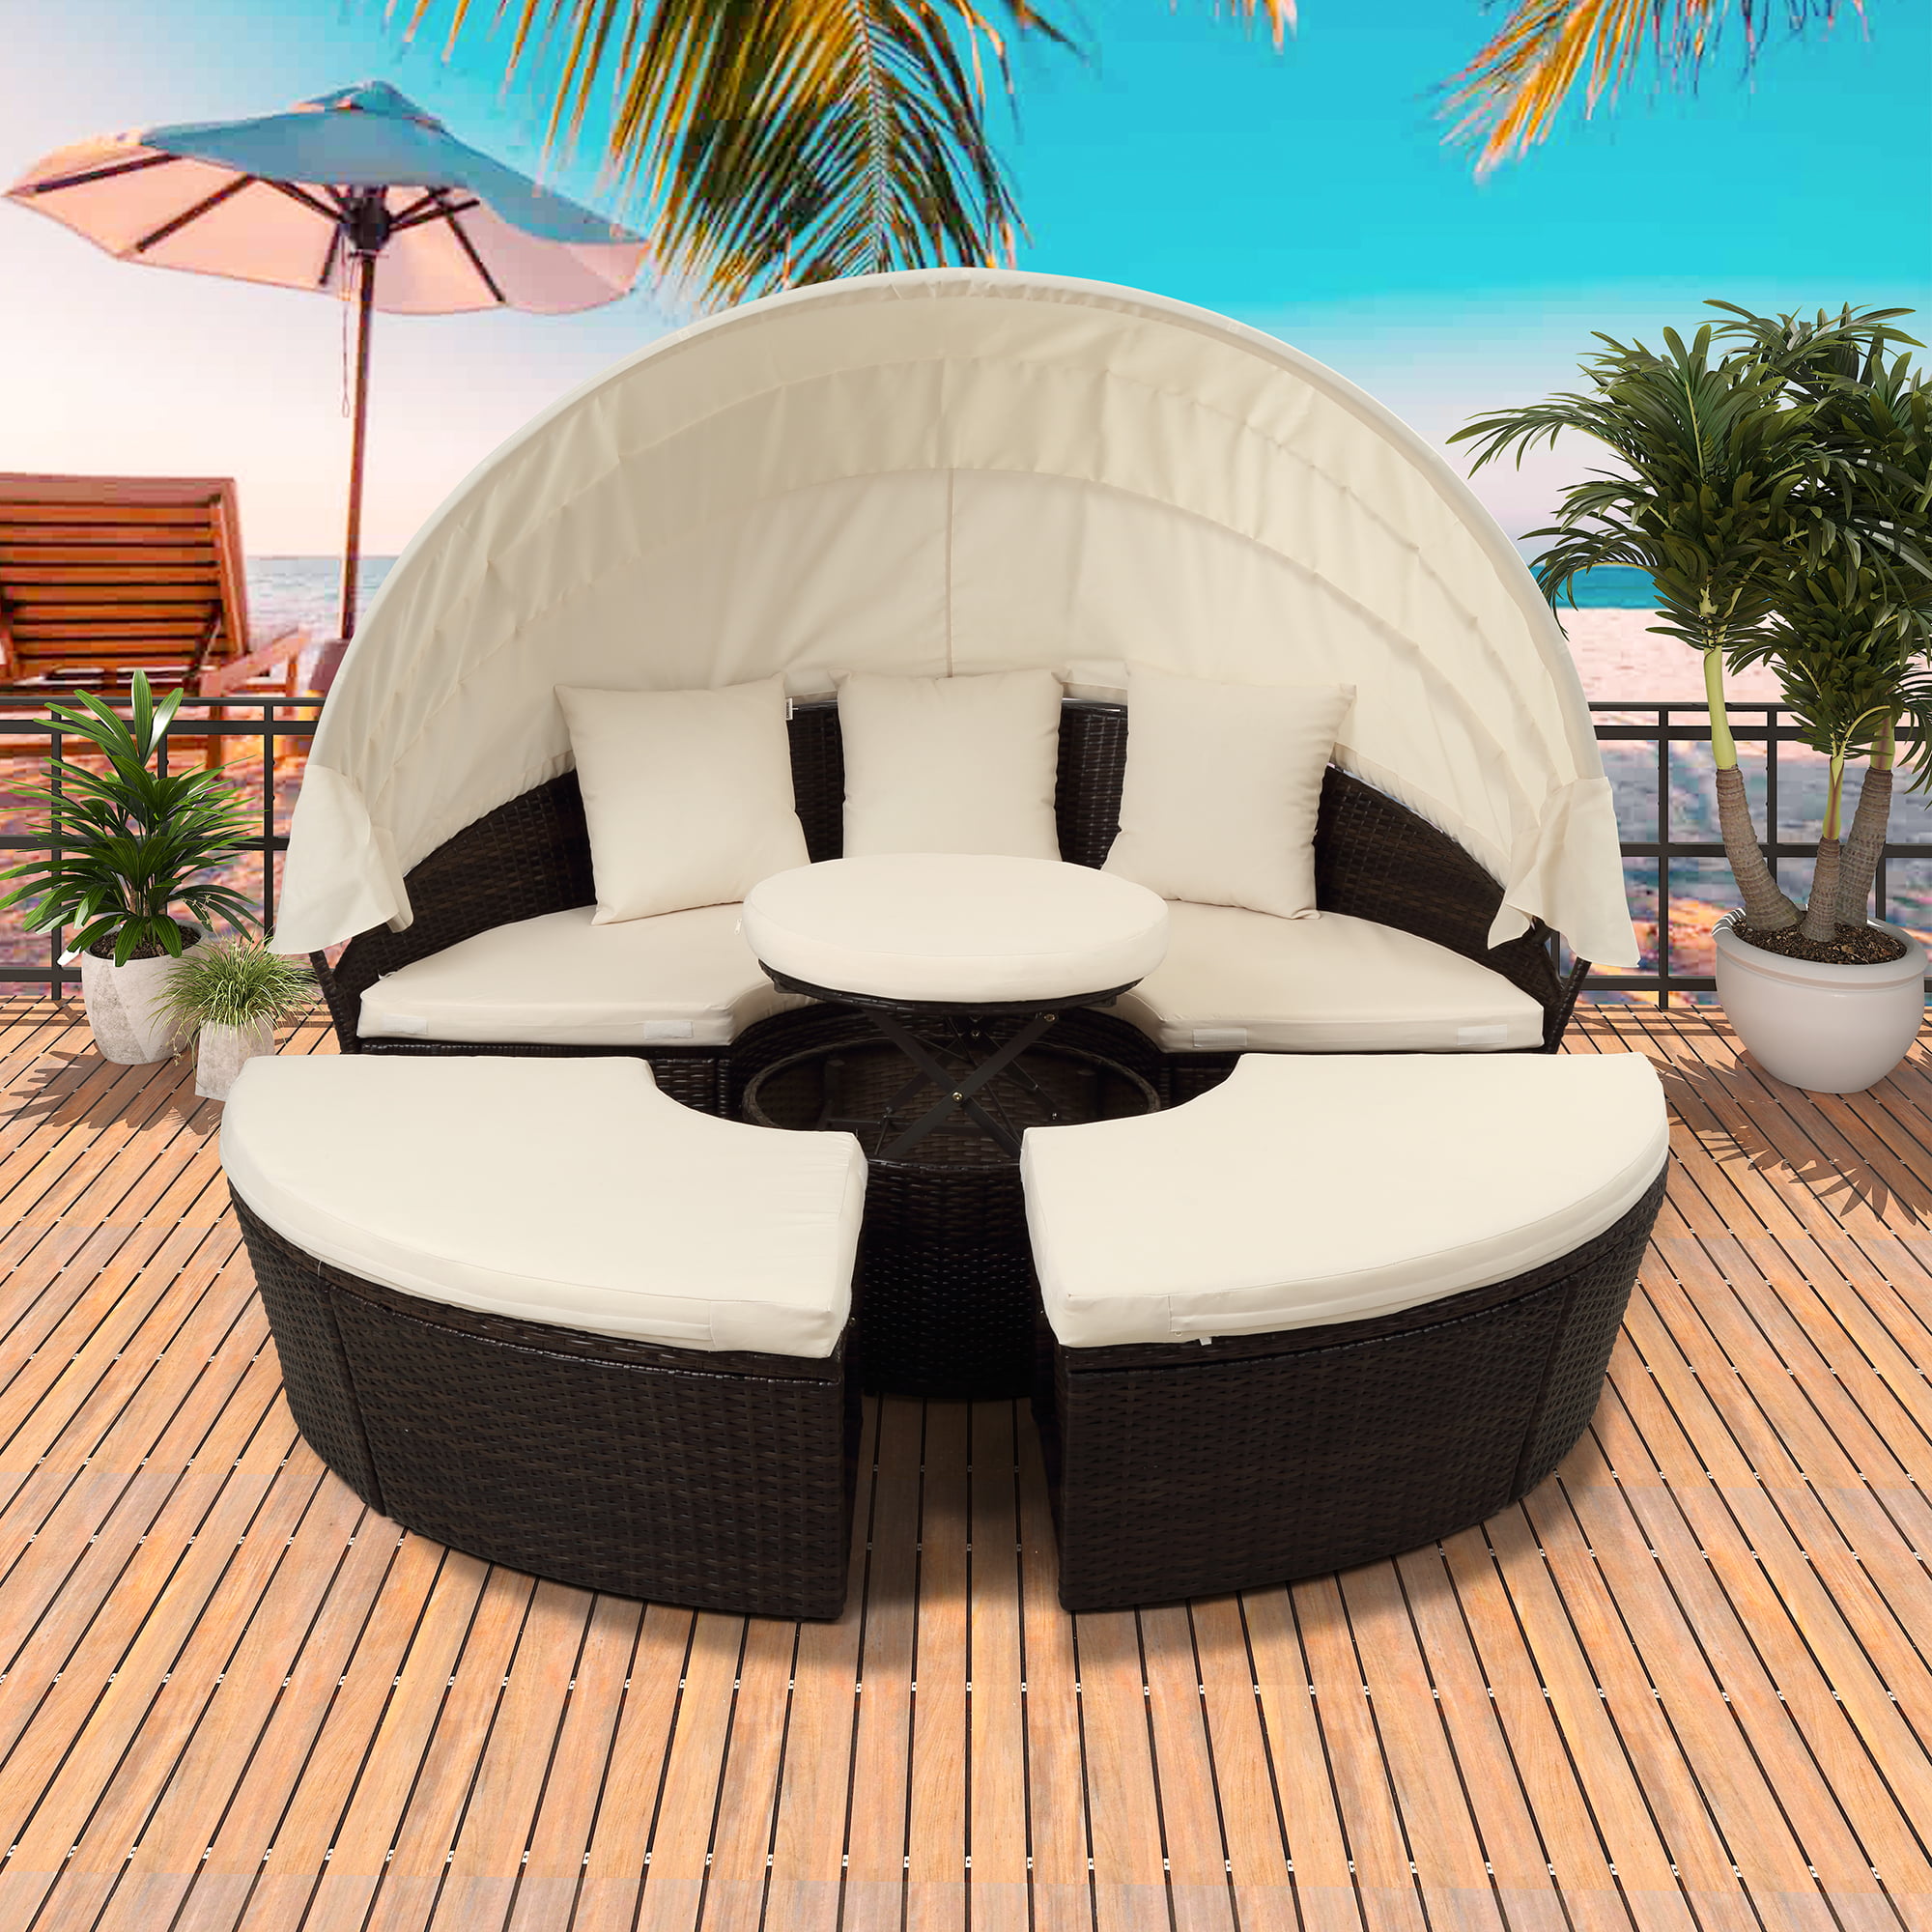 Patio Daybed, 5 Piece Patio Furniture Sets, Round Wicker ...